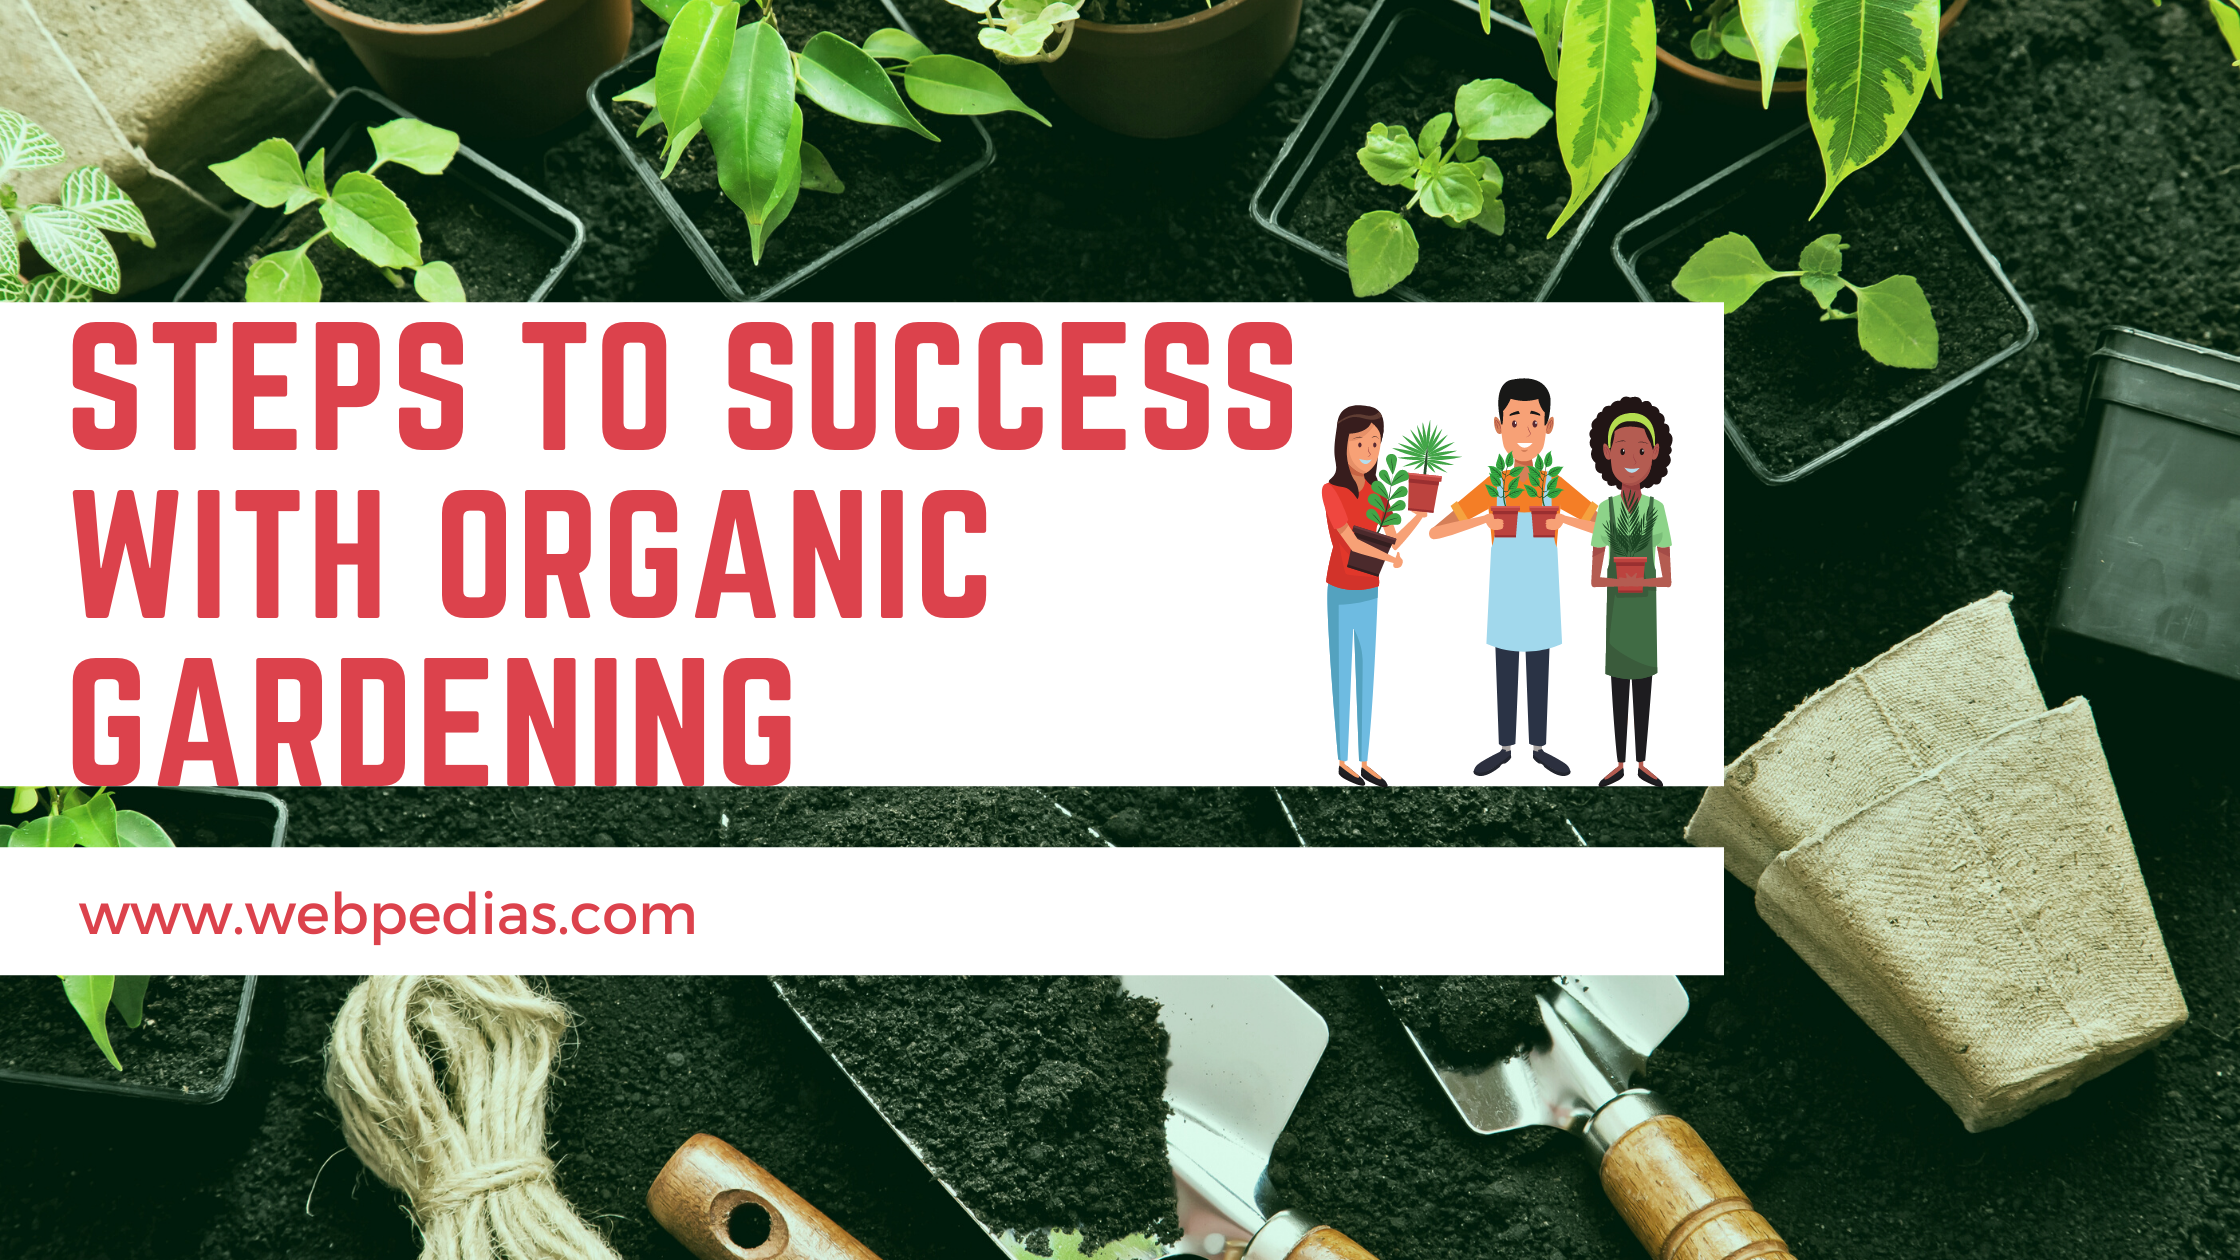 Steps to Success with Organic Gardening